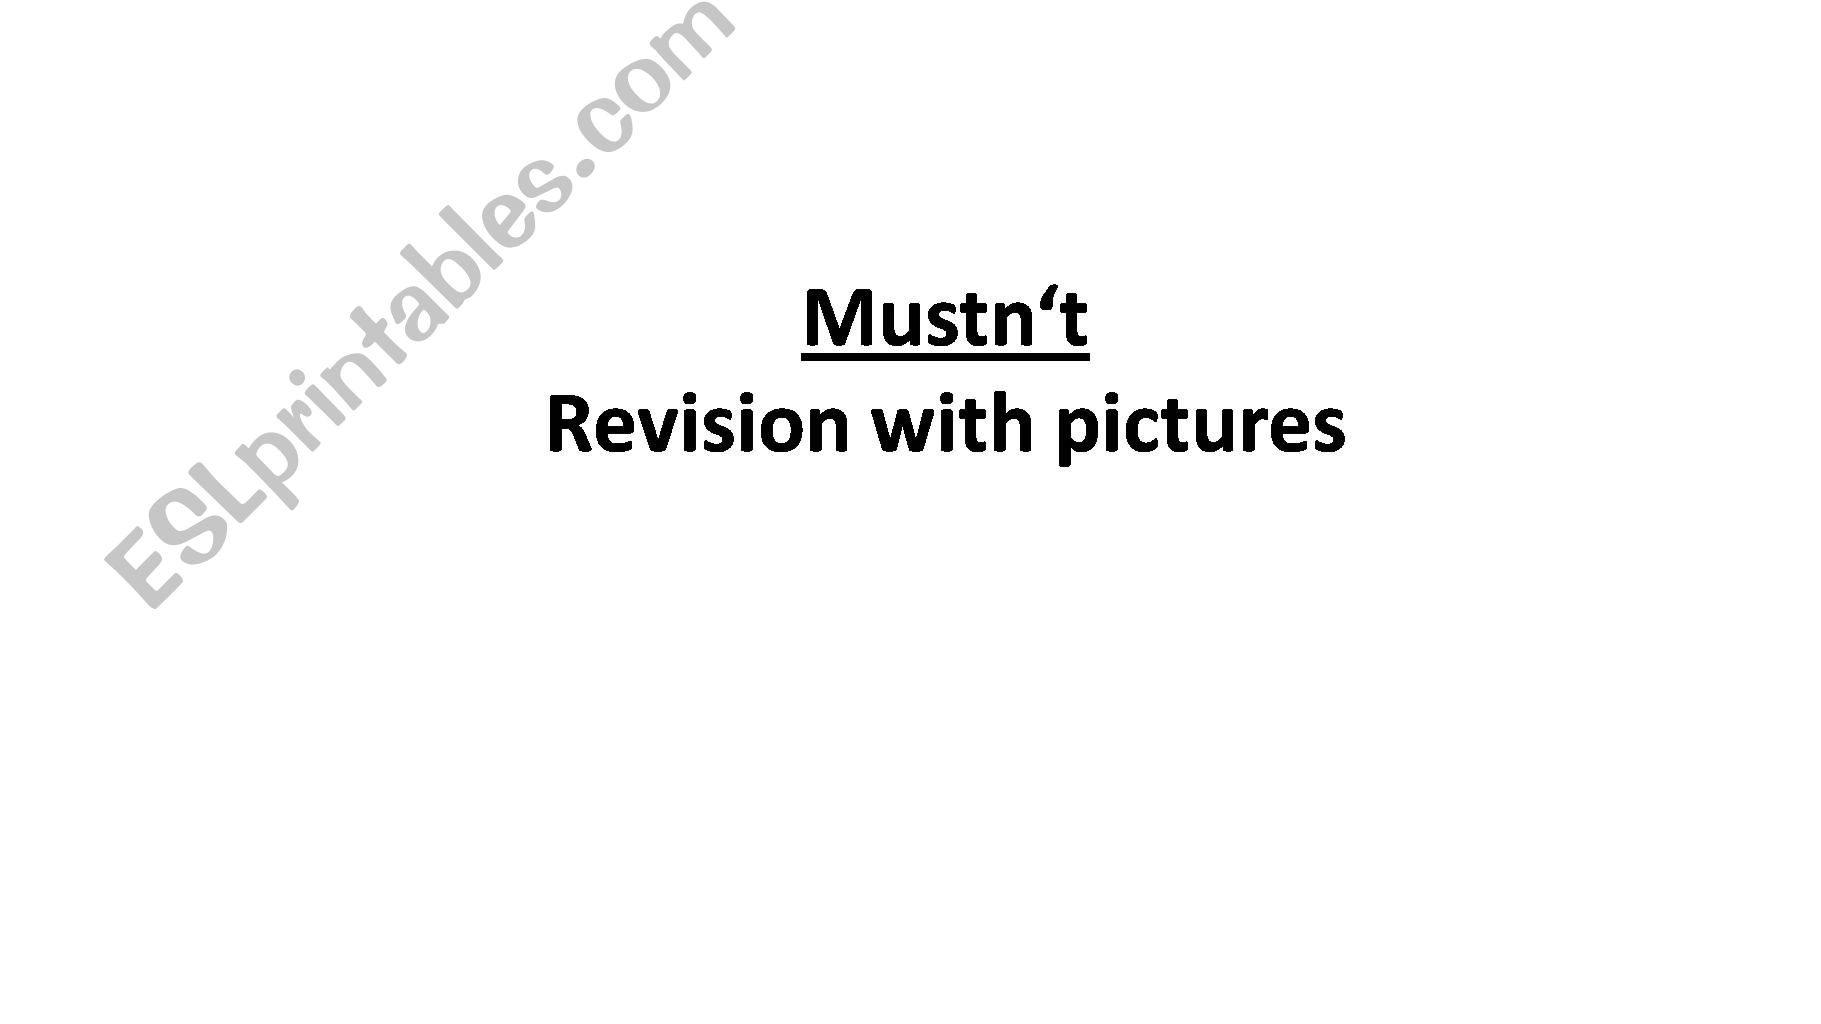 Mustnt - revision with pictures